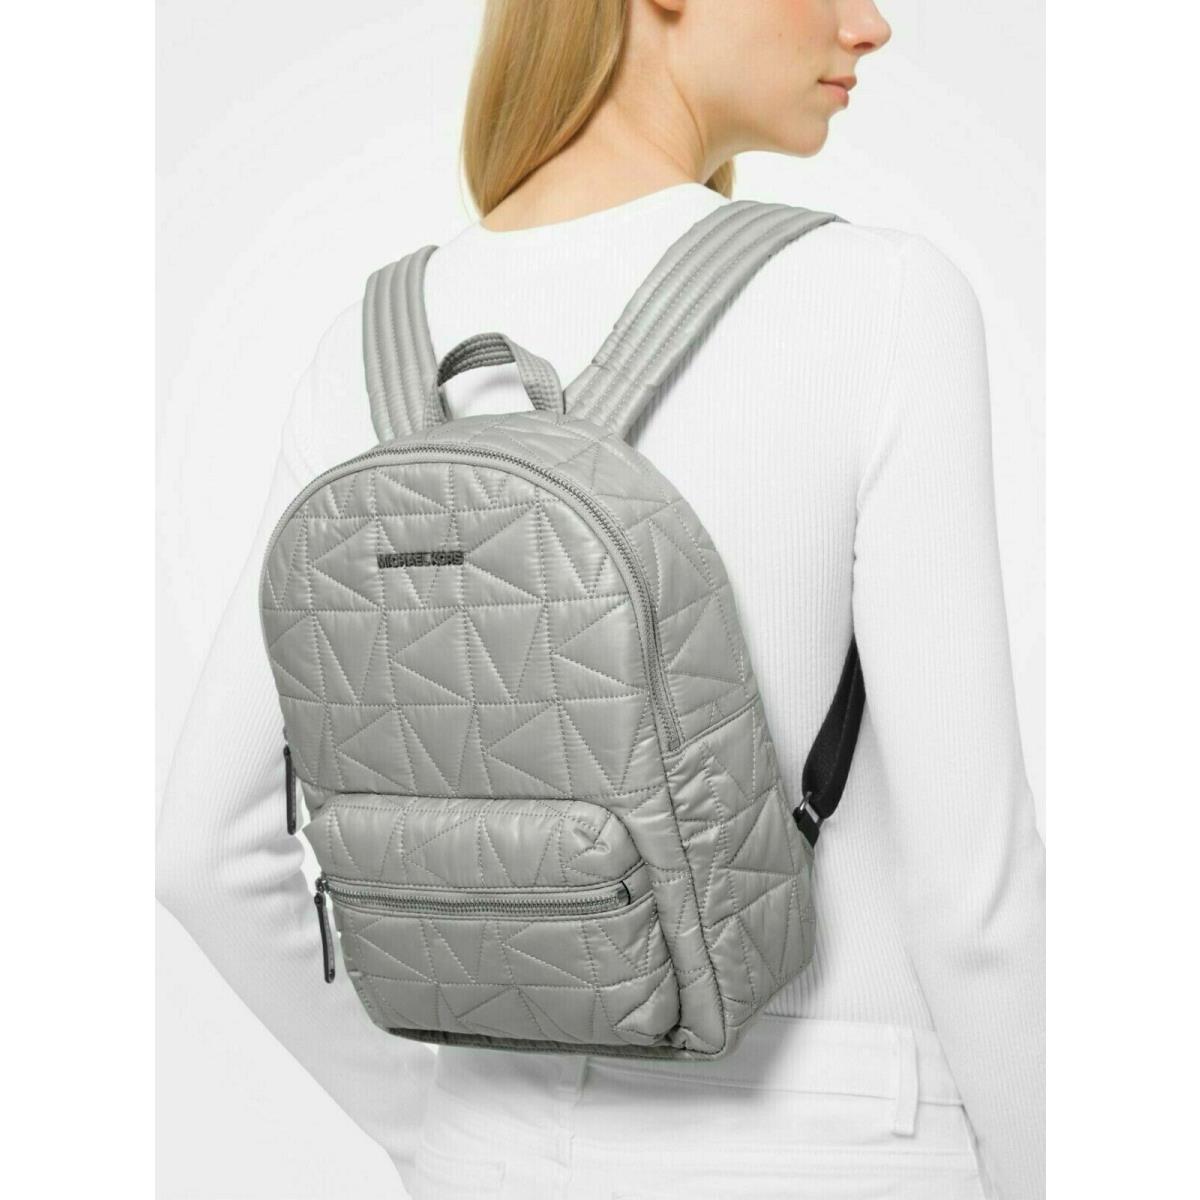 Michael Kors Winnie Medium Backpack Quilted Nylon Pearl Grey with Dust Bag